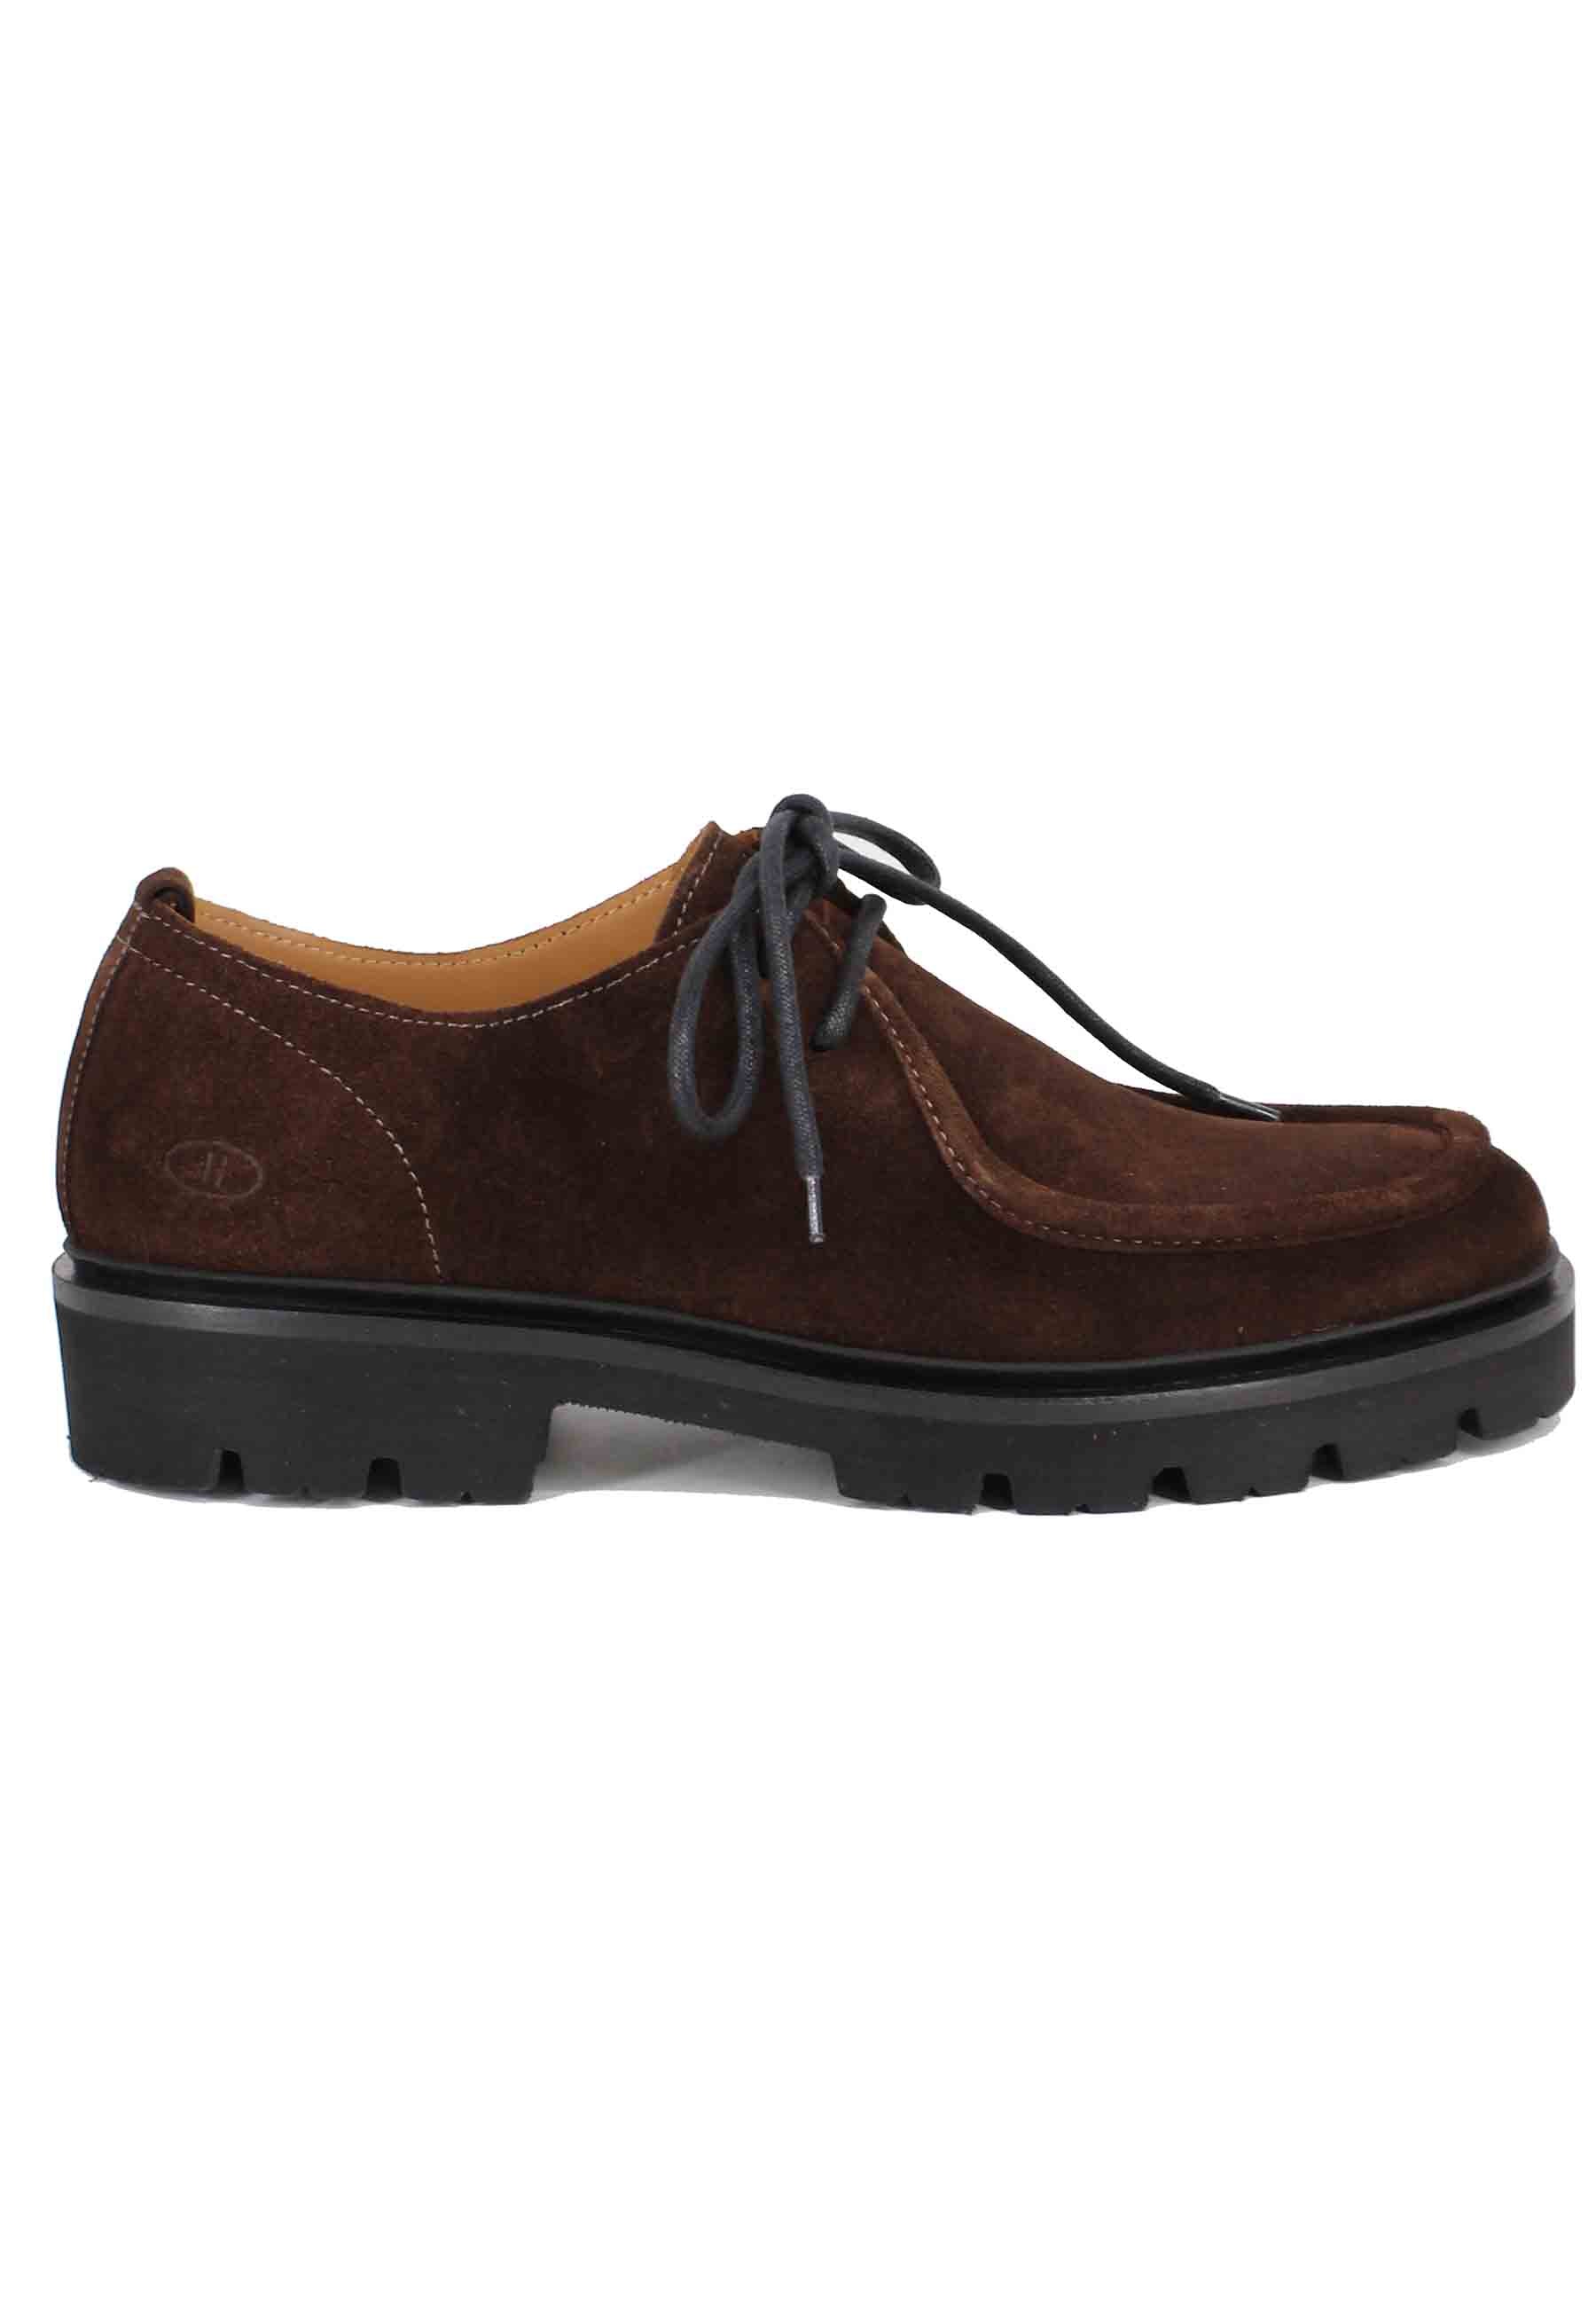 Men's lace-ups in dark brown suede with stitched tray